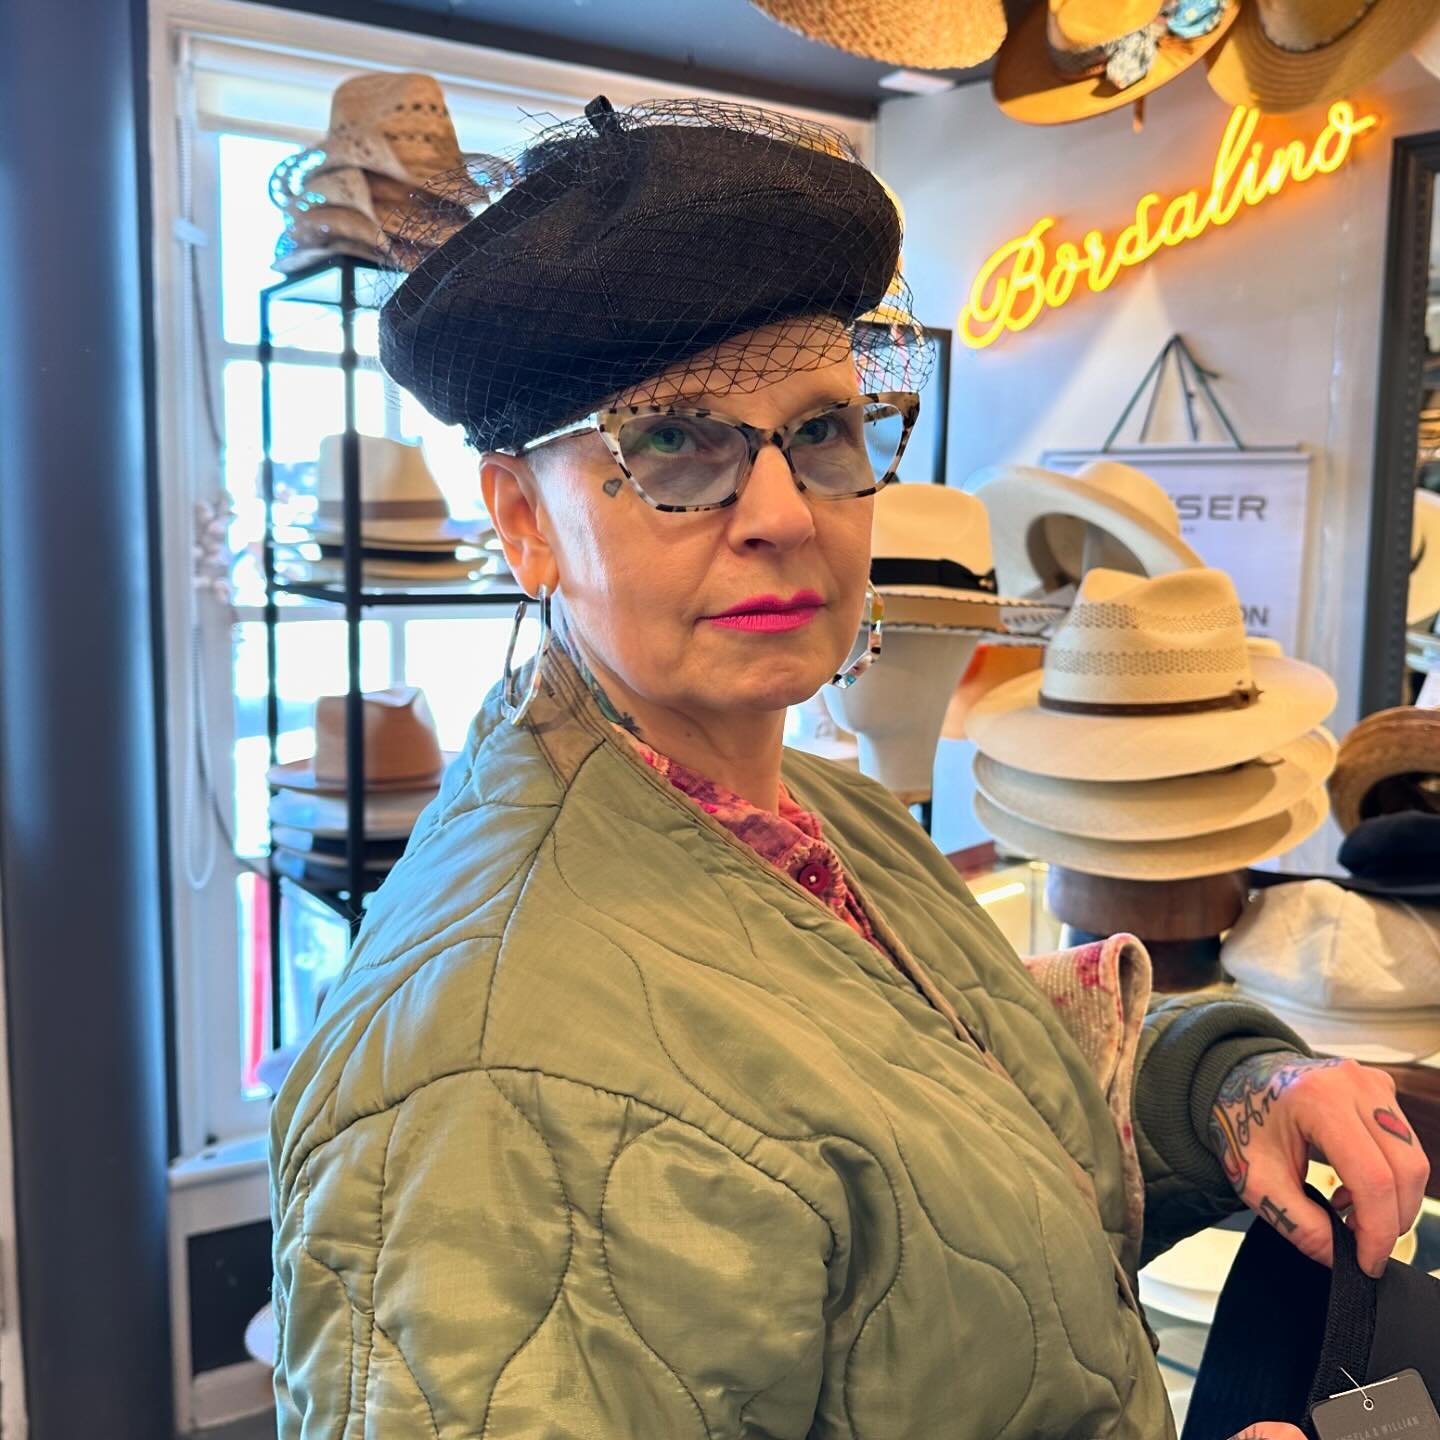 ✨Trying on hats at @eclipsehatshop ✨✨✨
A fabulous locally owned hat shop in our historic @pikeplacepublicmarket 
Go down and see Sharon &amp; Diego and support local Seattle businesses keeping it real!💛✨💛
&bull;
&bull;
&bull;
#thevajra #vajra #thev